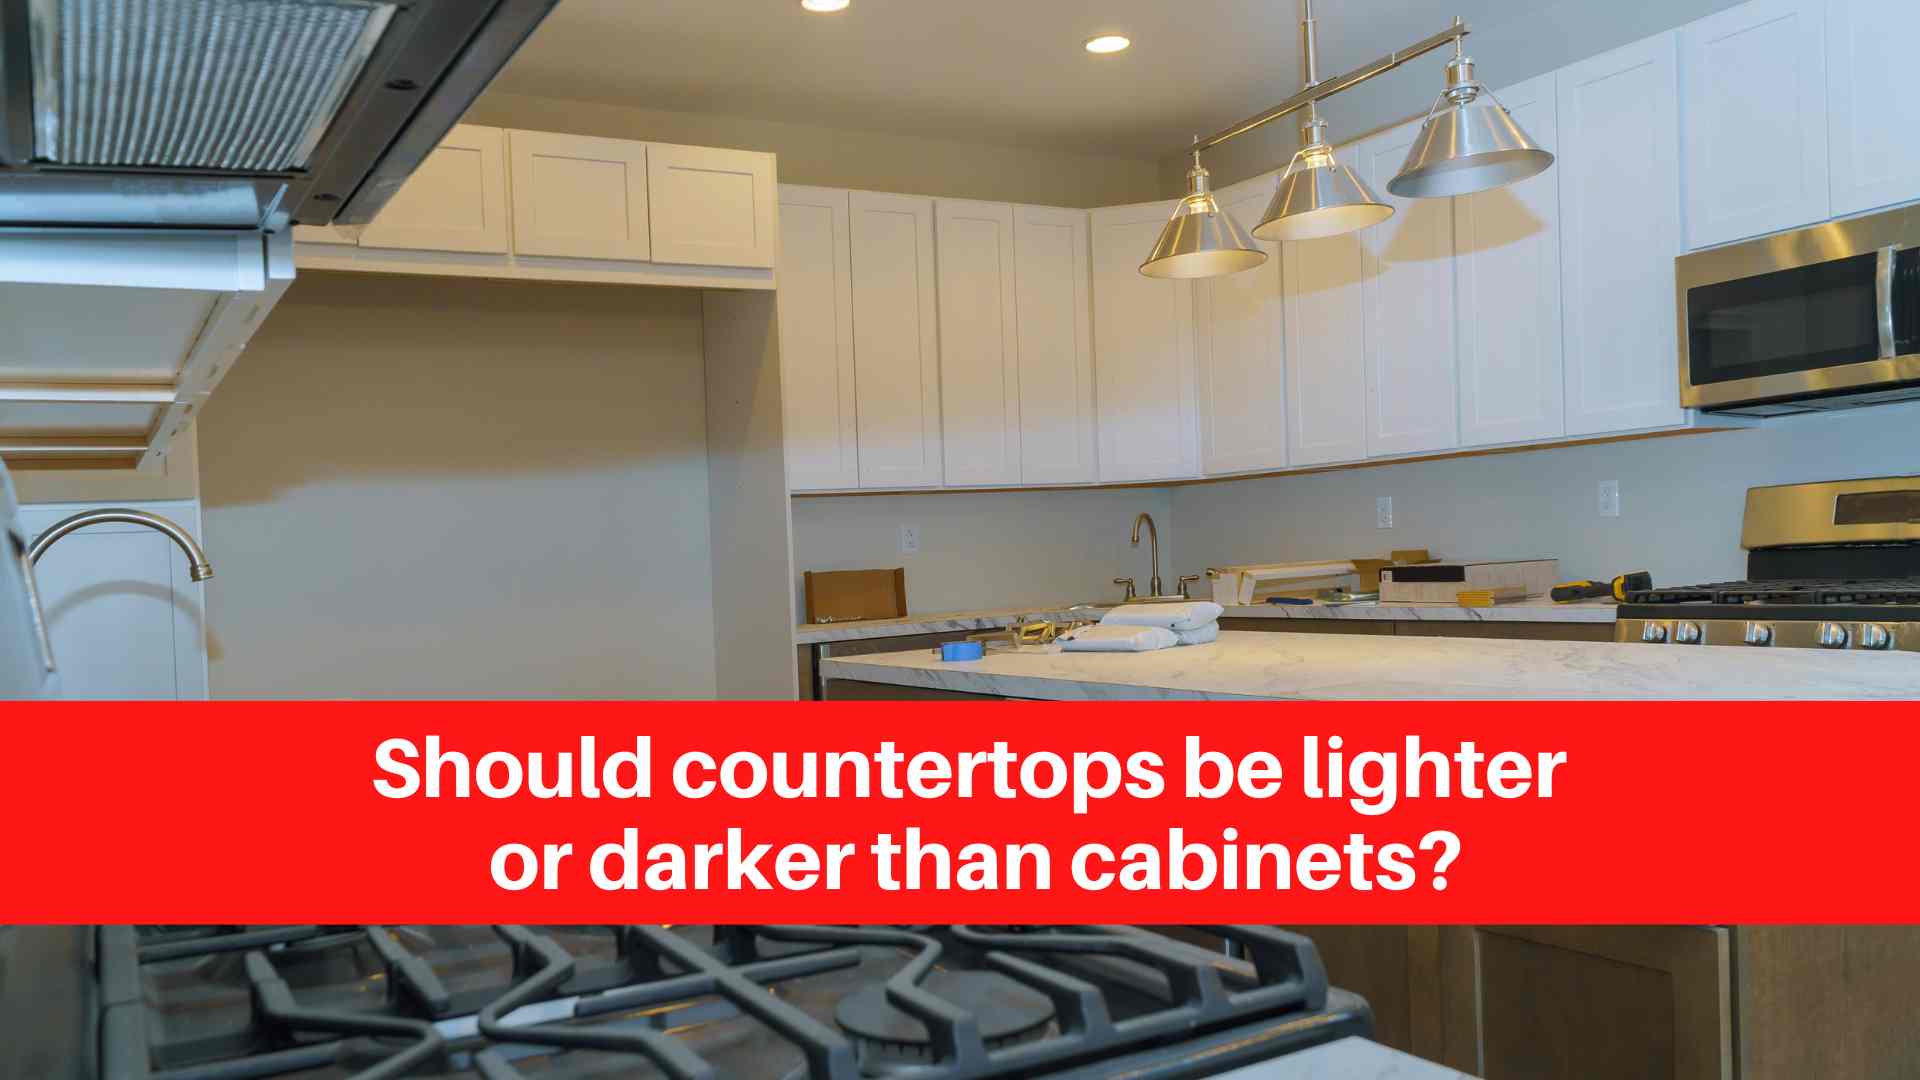 Should countertops be lighter or darker than cabinets